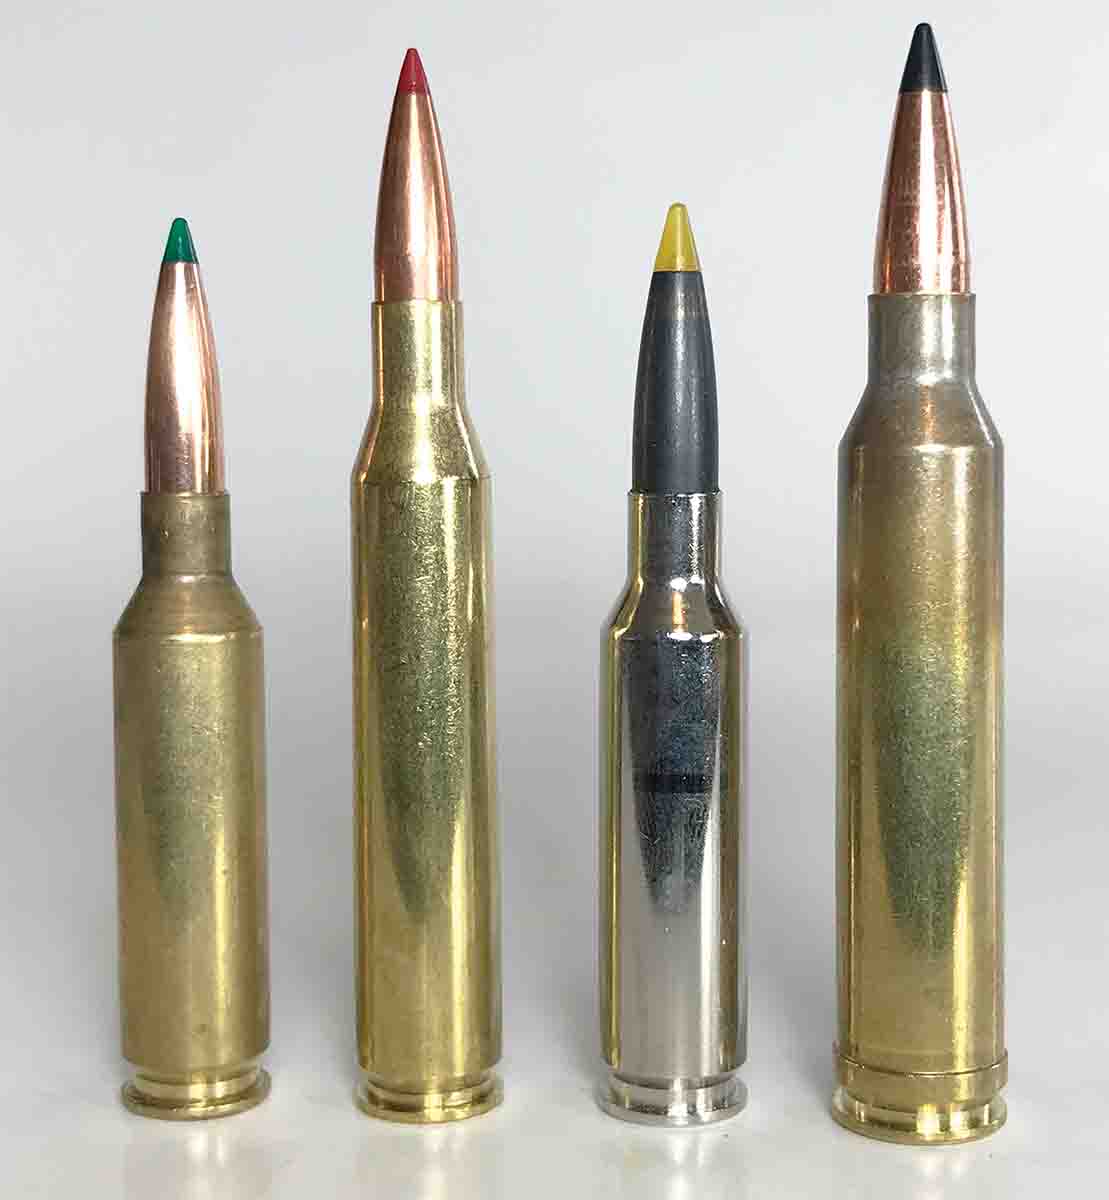 In recent years, several other cartridges have eclipsed the .25-06 as a long-range cartridge. This lineup includes the (1) 6mm Creedmoor, (2) .25-06, (3) 6.5 Creedmoor and the (4) 7mm Remington Magnum.